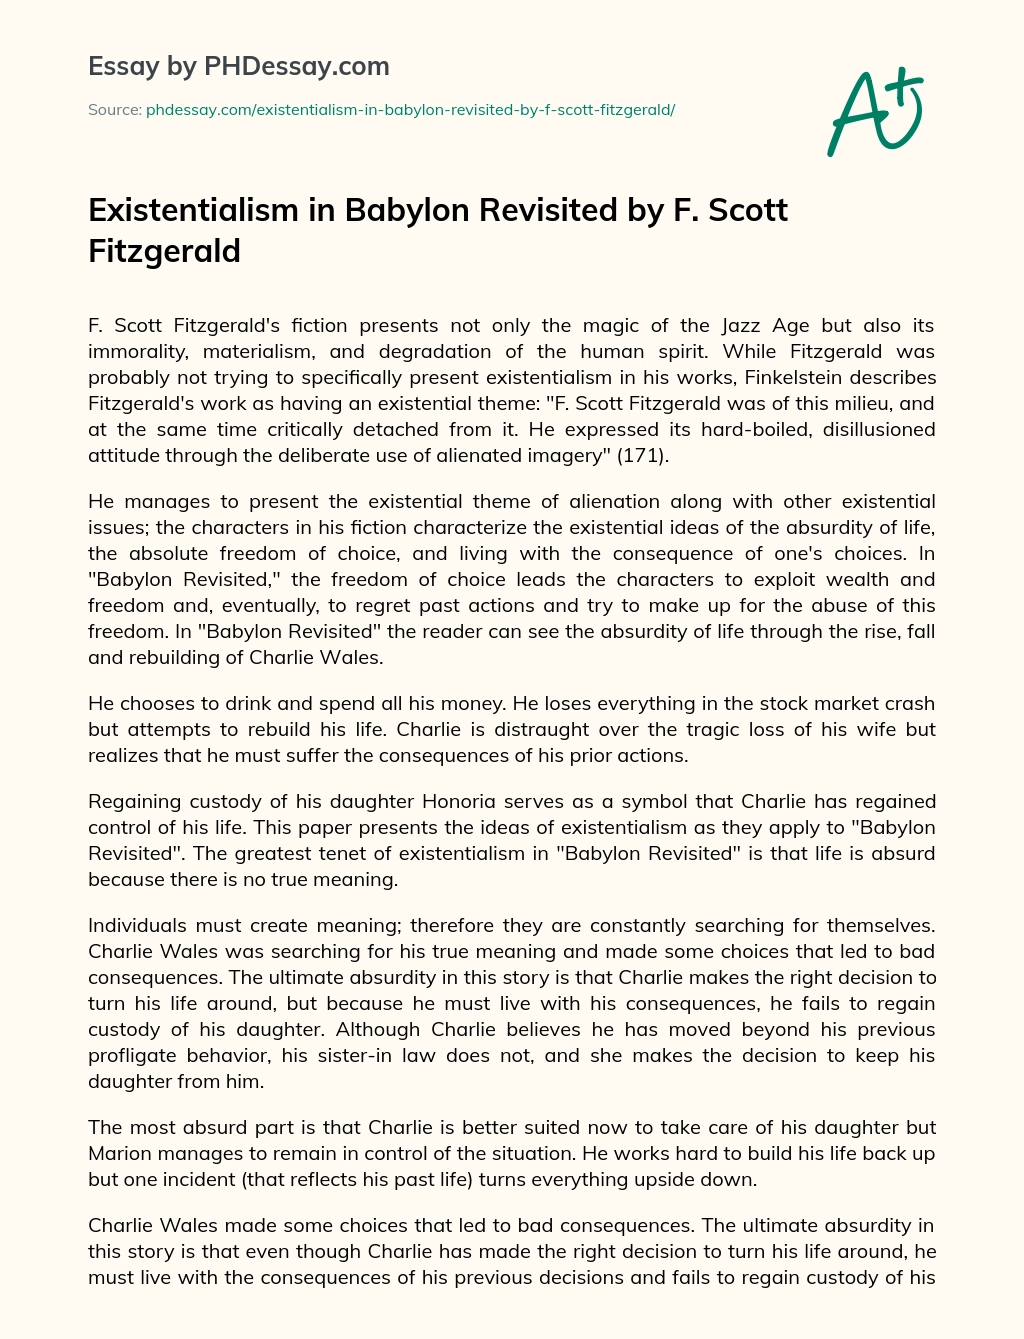 Existentialism in Babylon Revisited by F. Scott Fitzgerald essay